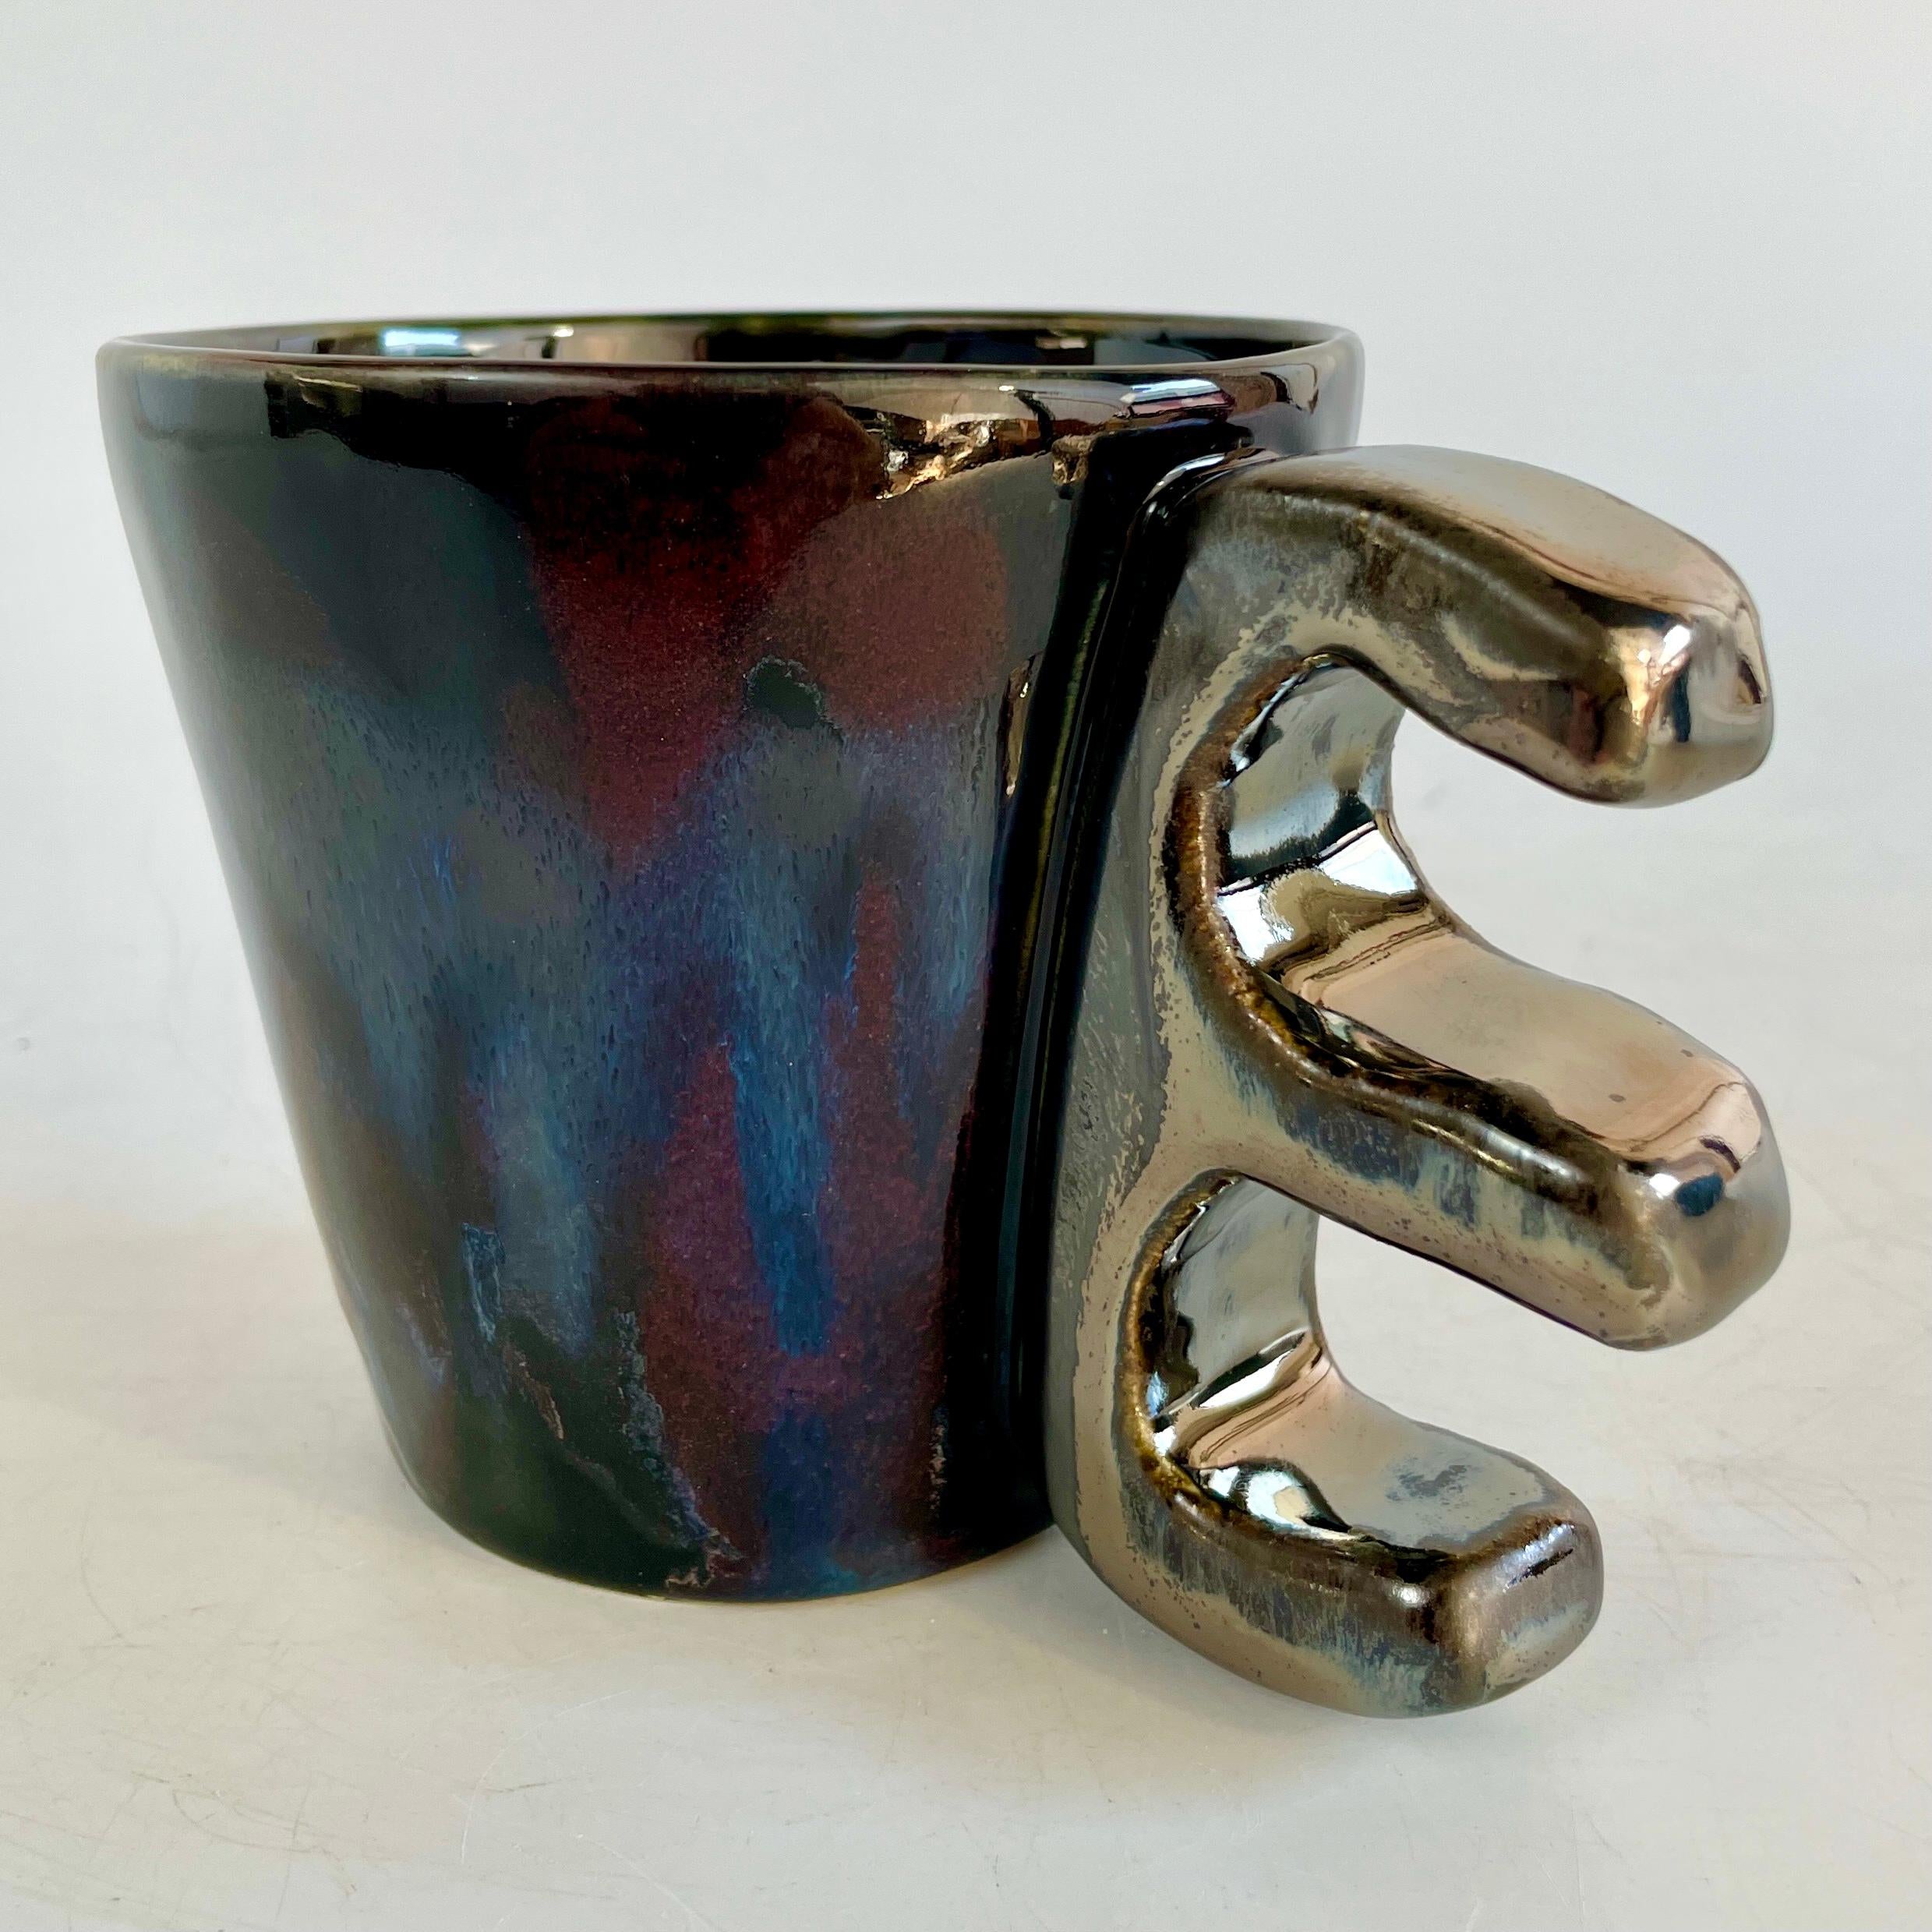 Carved Knuckler Three Finger Tumbler, Handmade and Food Safe, by Ceramicist Stef Duffy For Sale